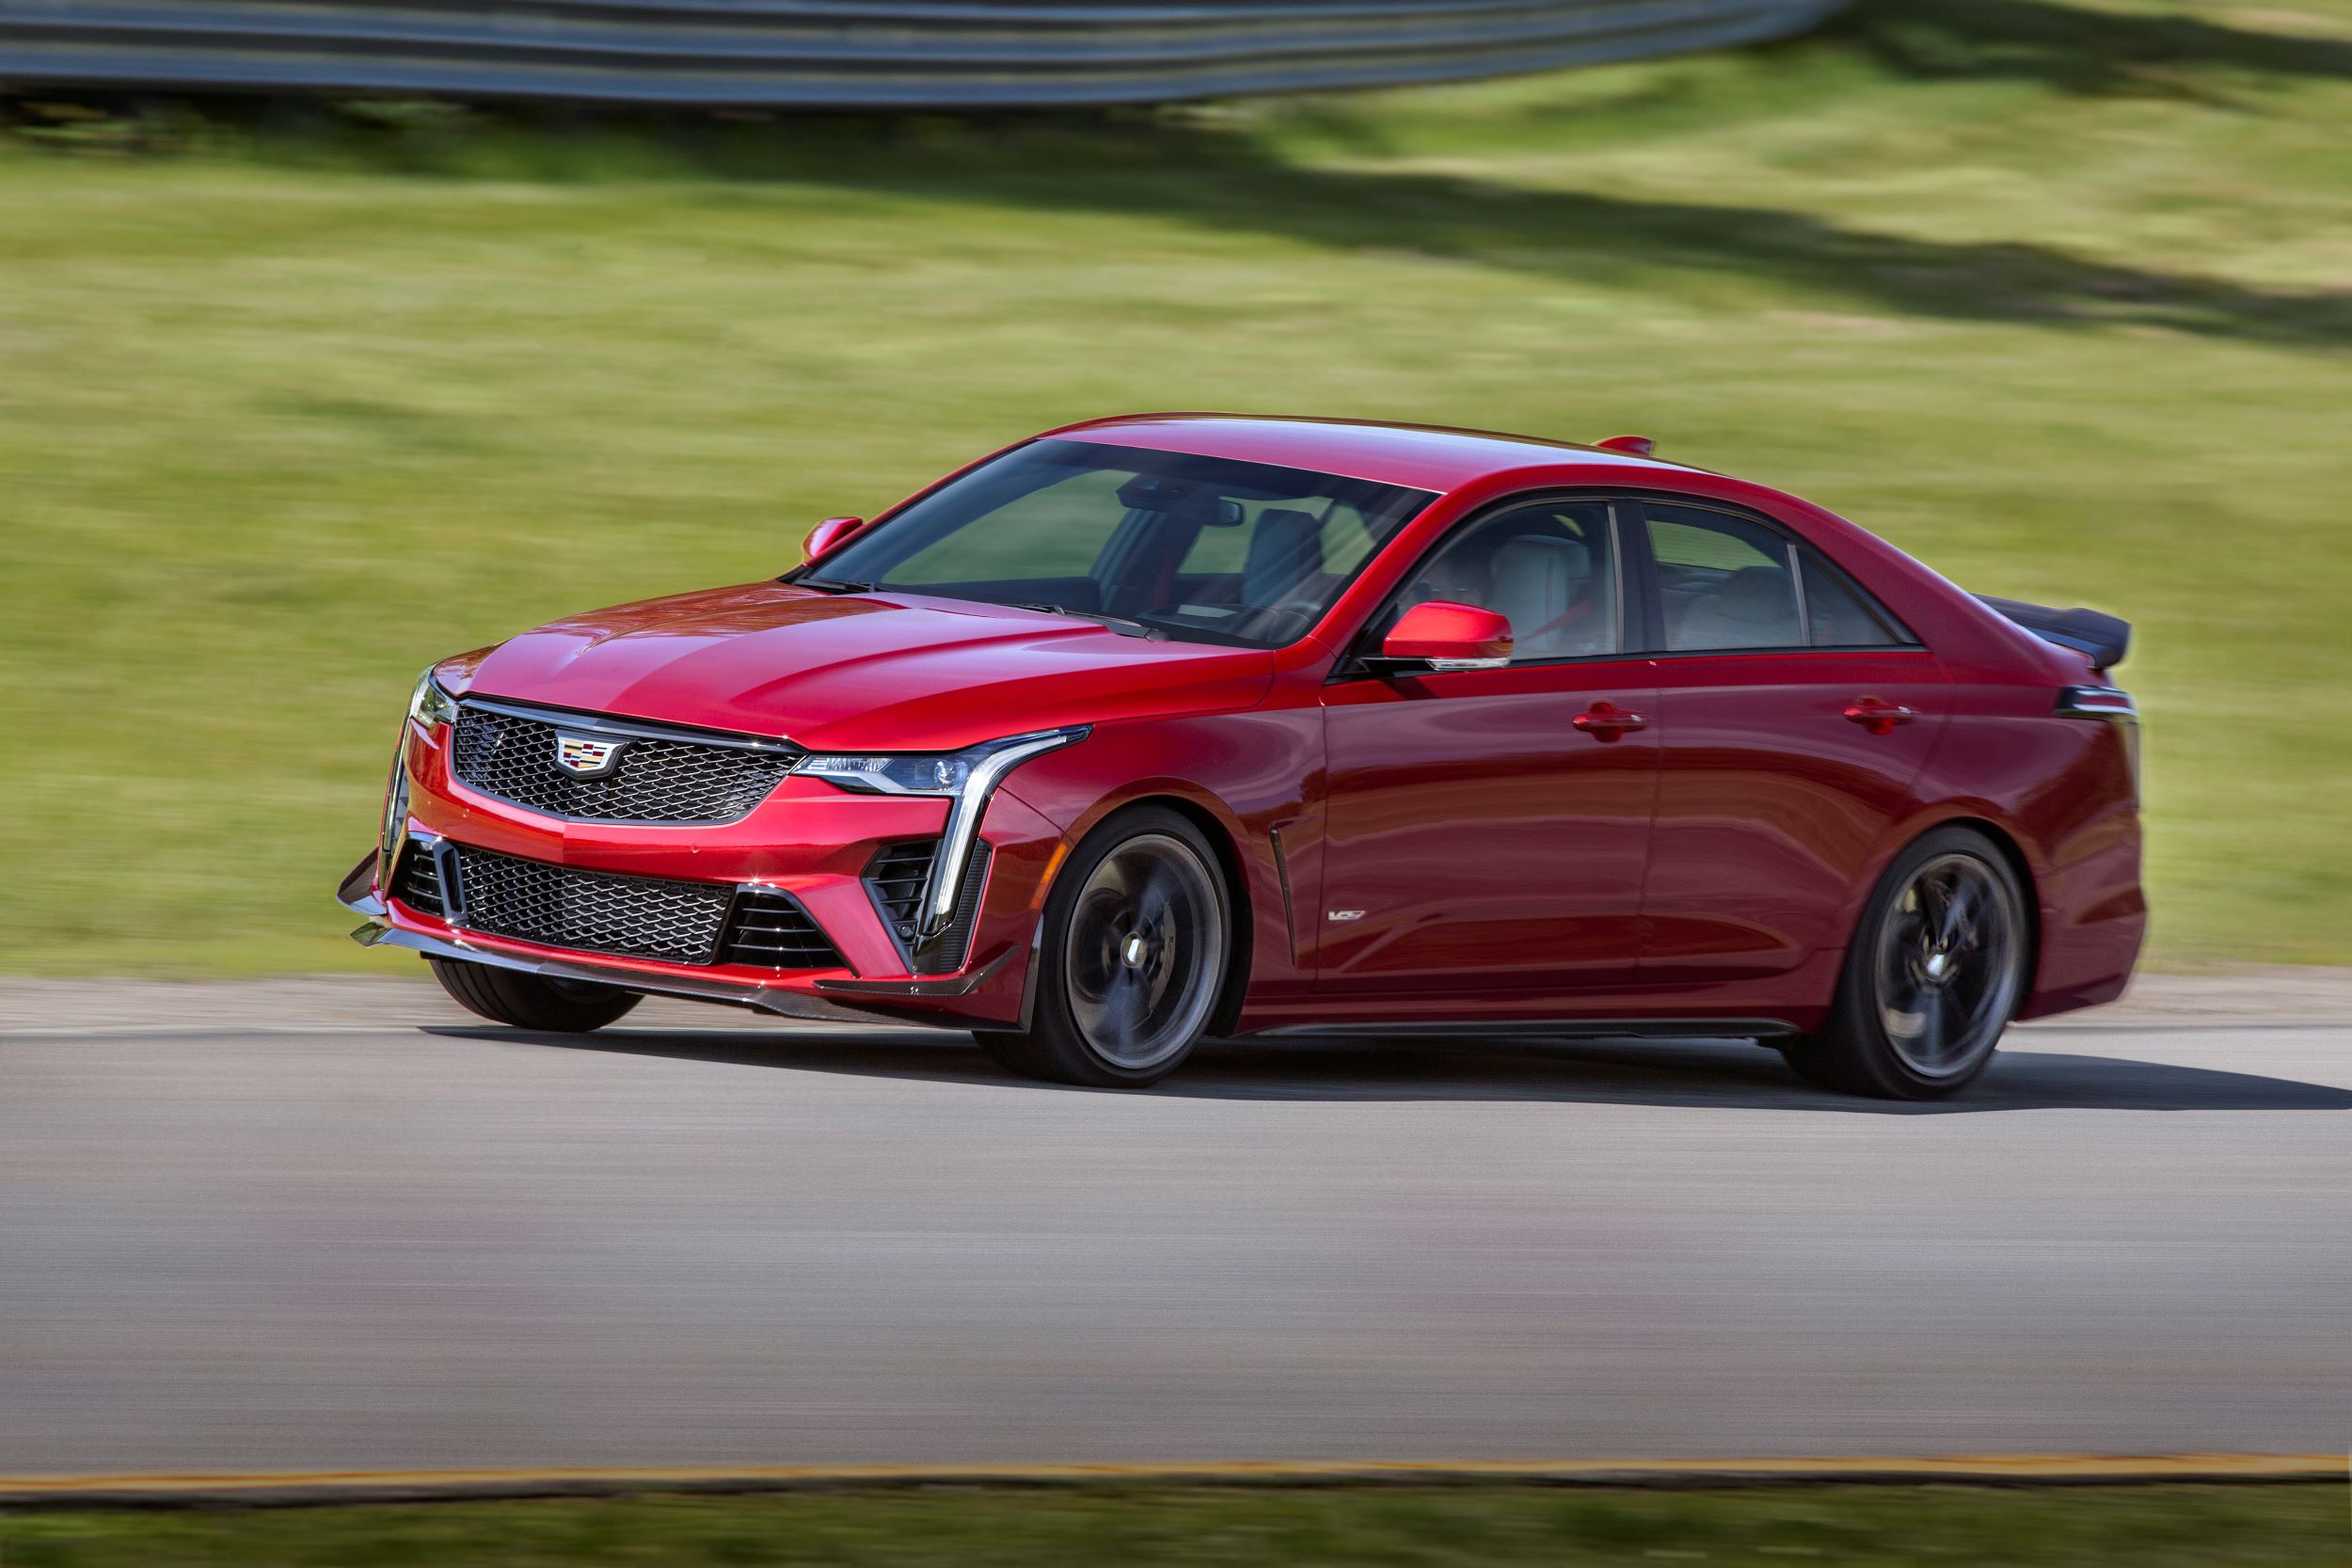 2022 Cadillac CT4-V Blackwing Delivers Highest Downforce in V-Series History